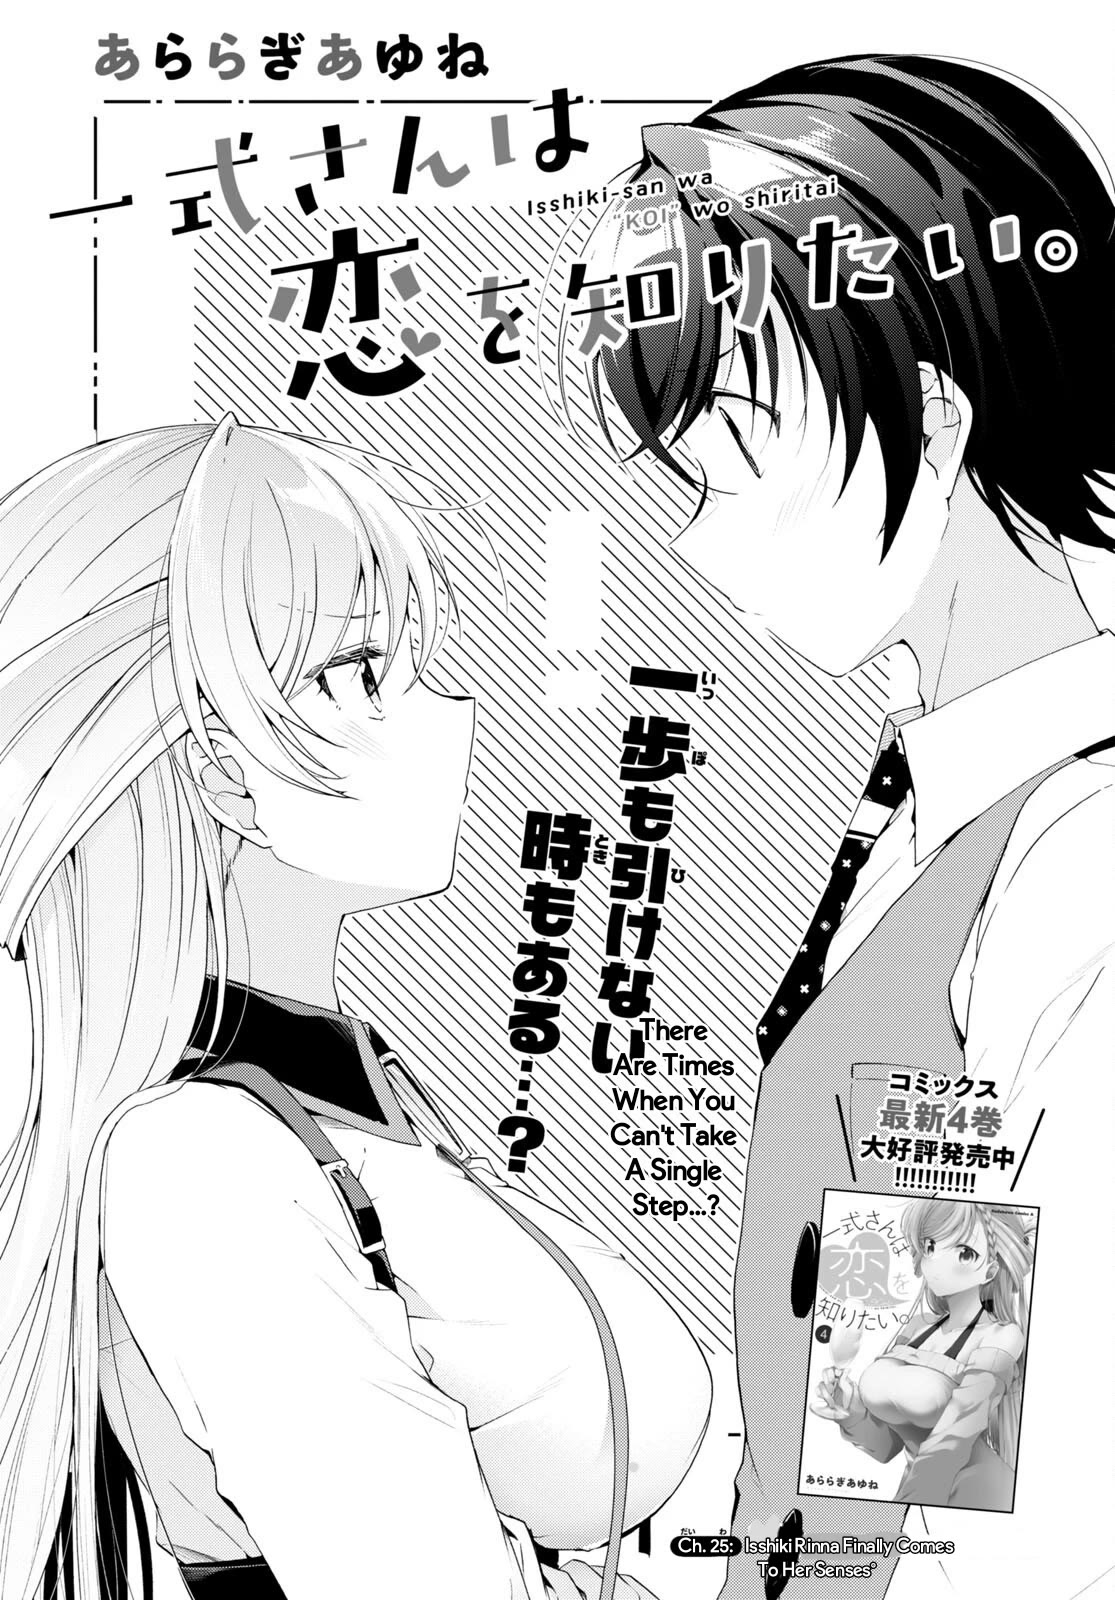 Isshiki-san Wants to Know About Love. - chapter 25 - #1